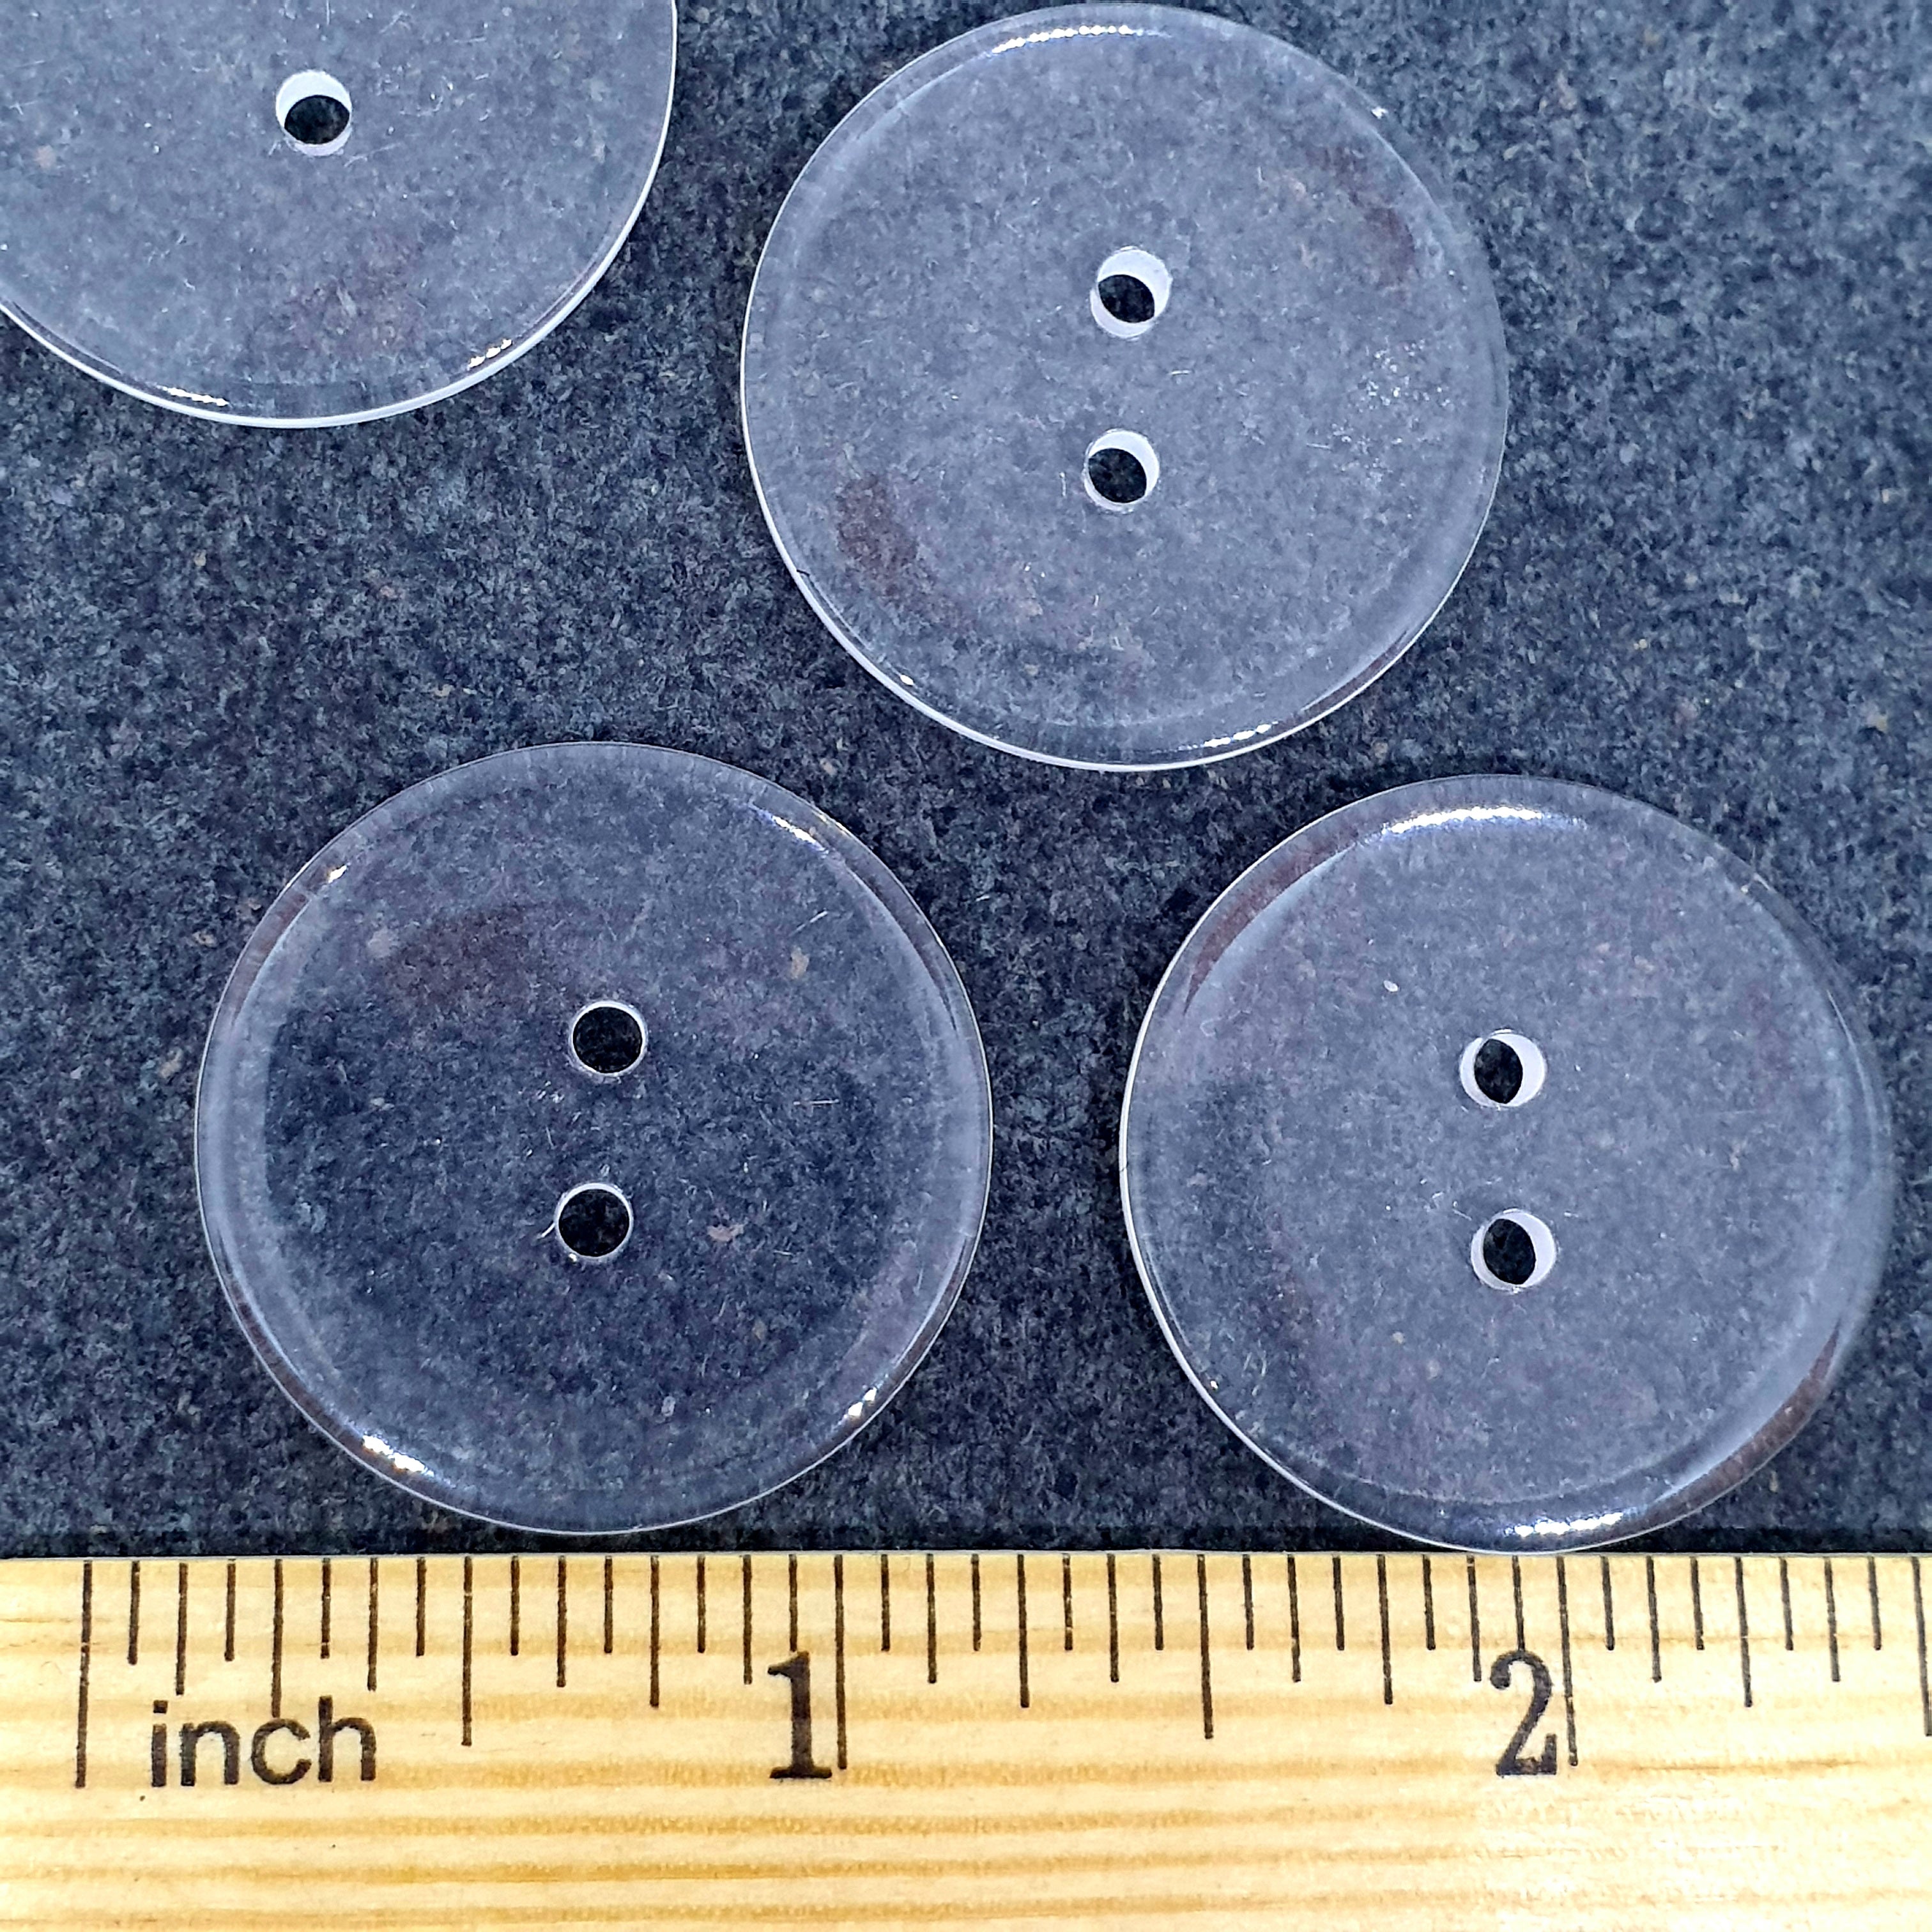 MajorCrafts 24pcs 28mm Transparent Clear 2 holes Large Round Resin Sewing Buttons